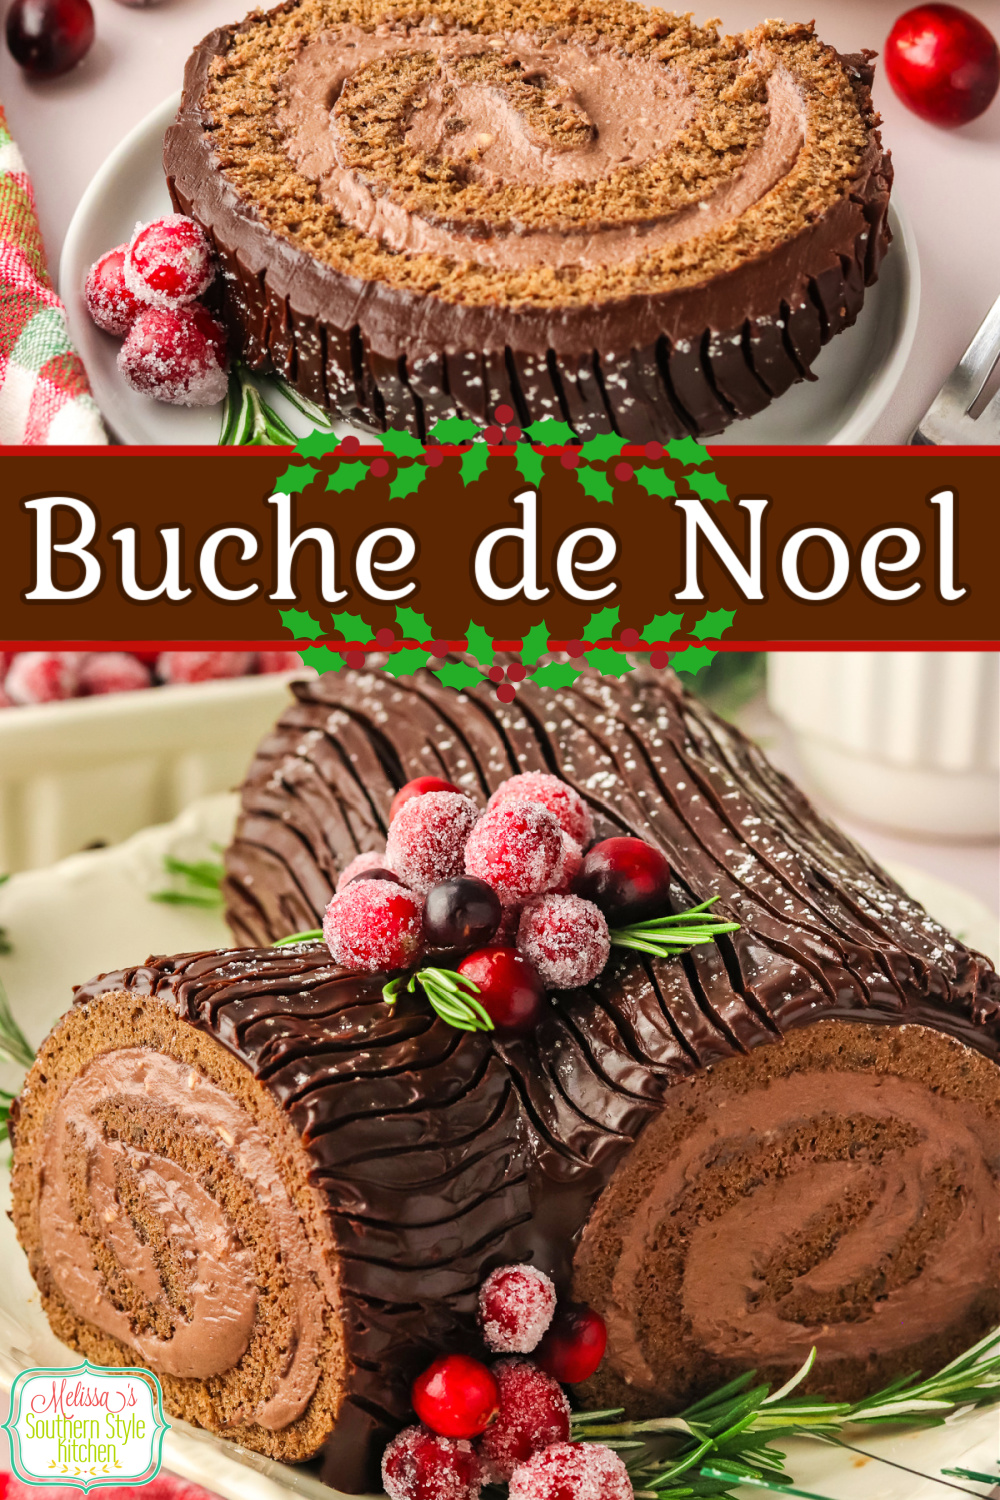 Serve this stunning chocolate Buche de Noel for the holidays this year! #buchedenoel #yulelog #chocolatecake #cakerolls #cakerollrecipe #chocolatedesserts #chocolatecakerecipes #christmasrecipes #christmascakes via @melissasssk